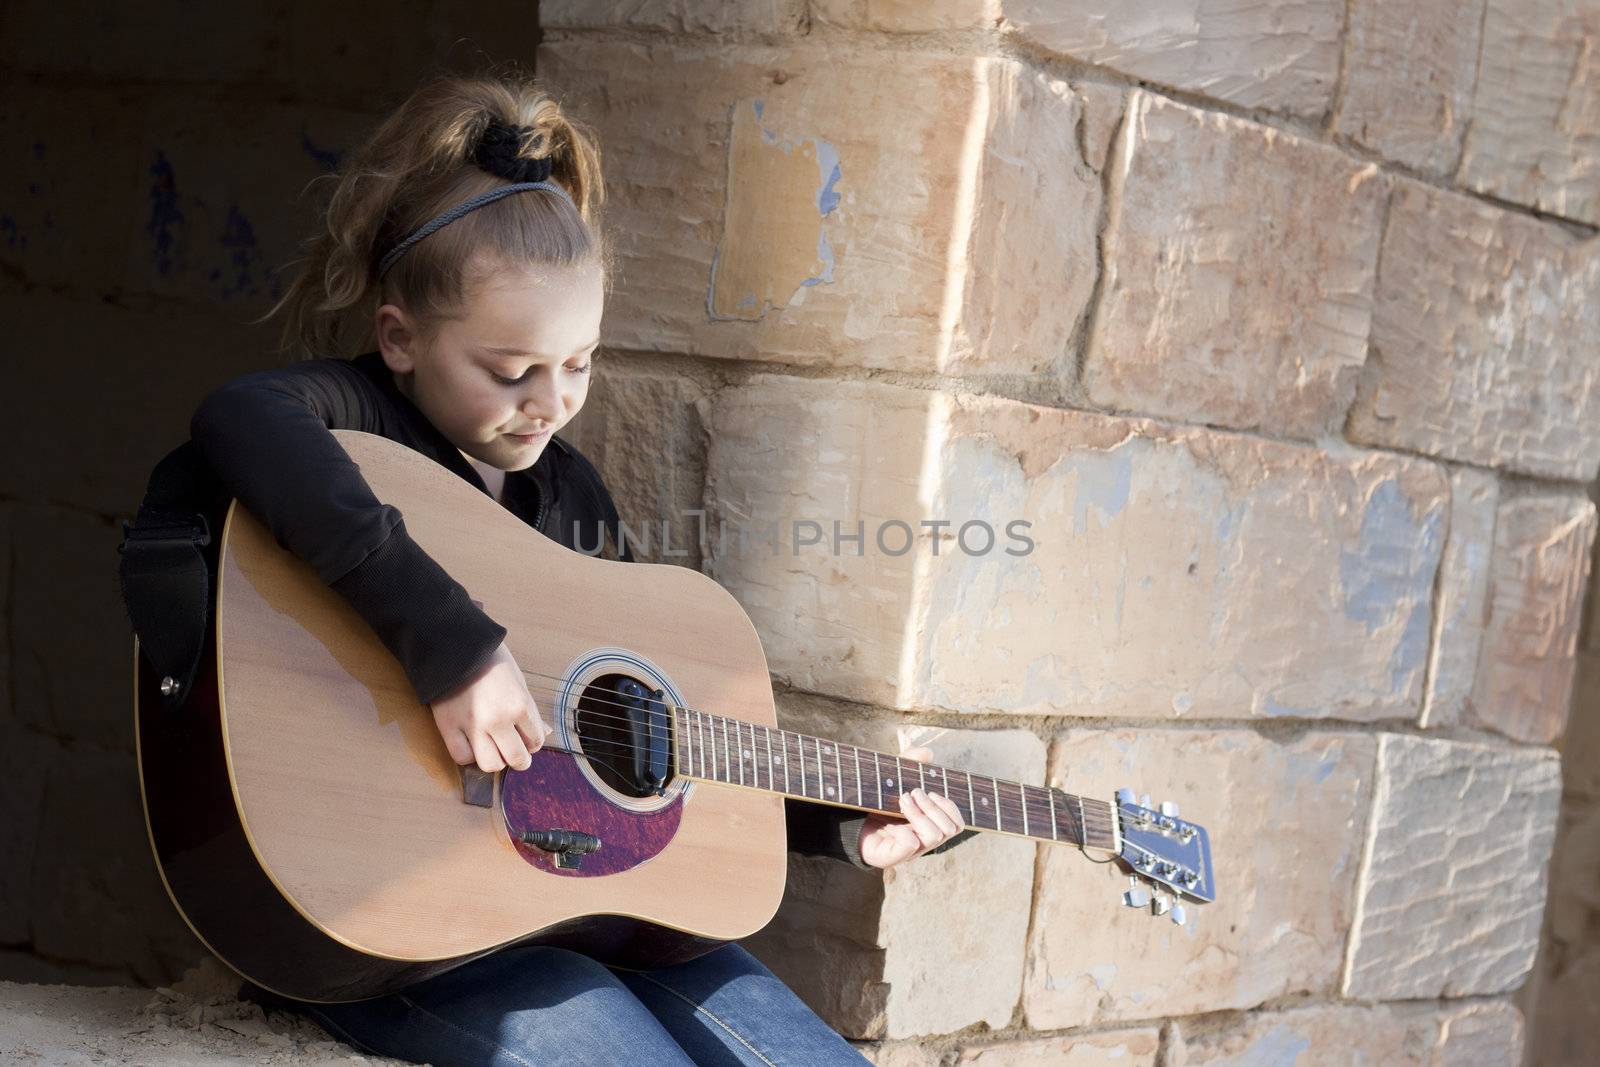 A girl learning or practicing on a musical instrument, a guitar. Space for text